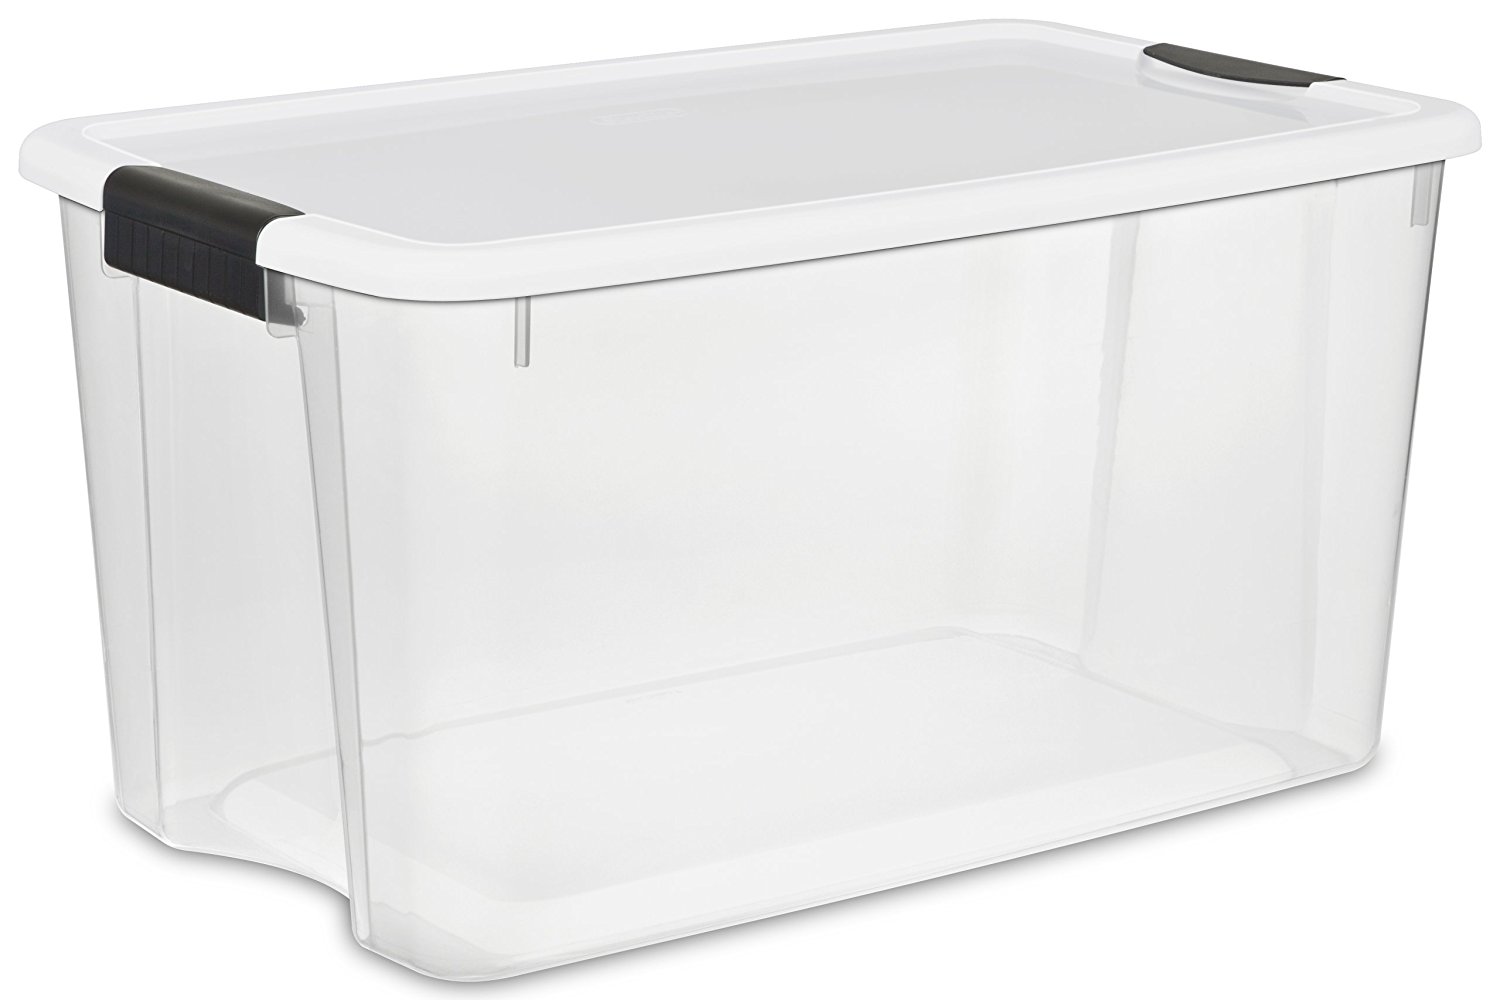 Sterilite 19889804 70 Quart/66 Liter Ultra Latch Box, Clear with a White Lid and Black Latches, 4-Pack